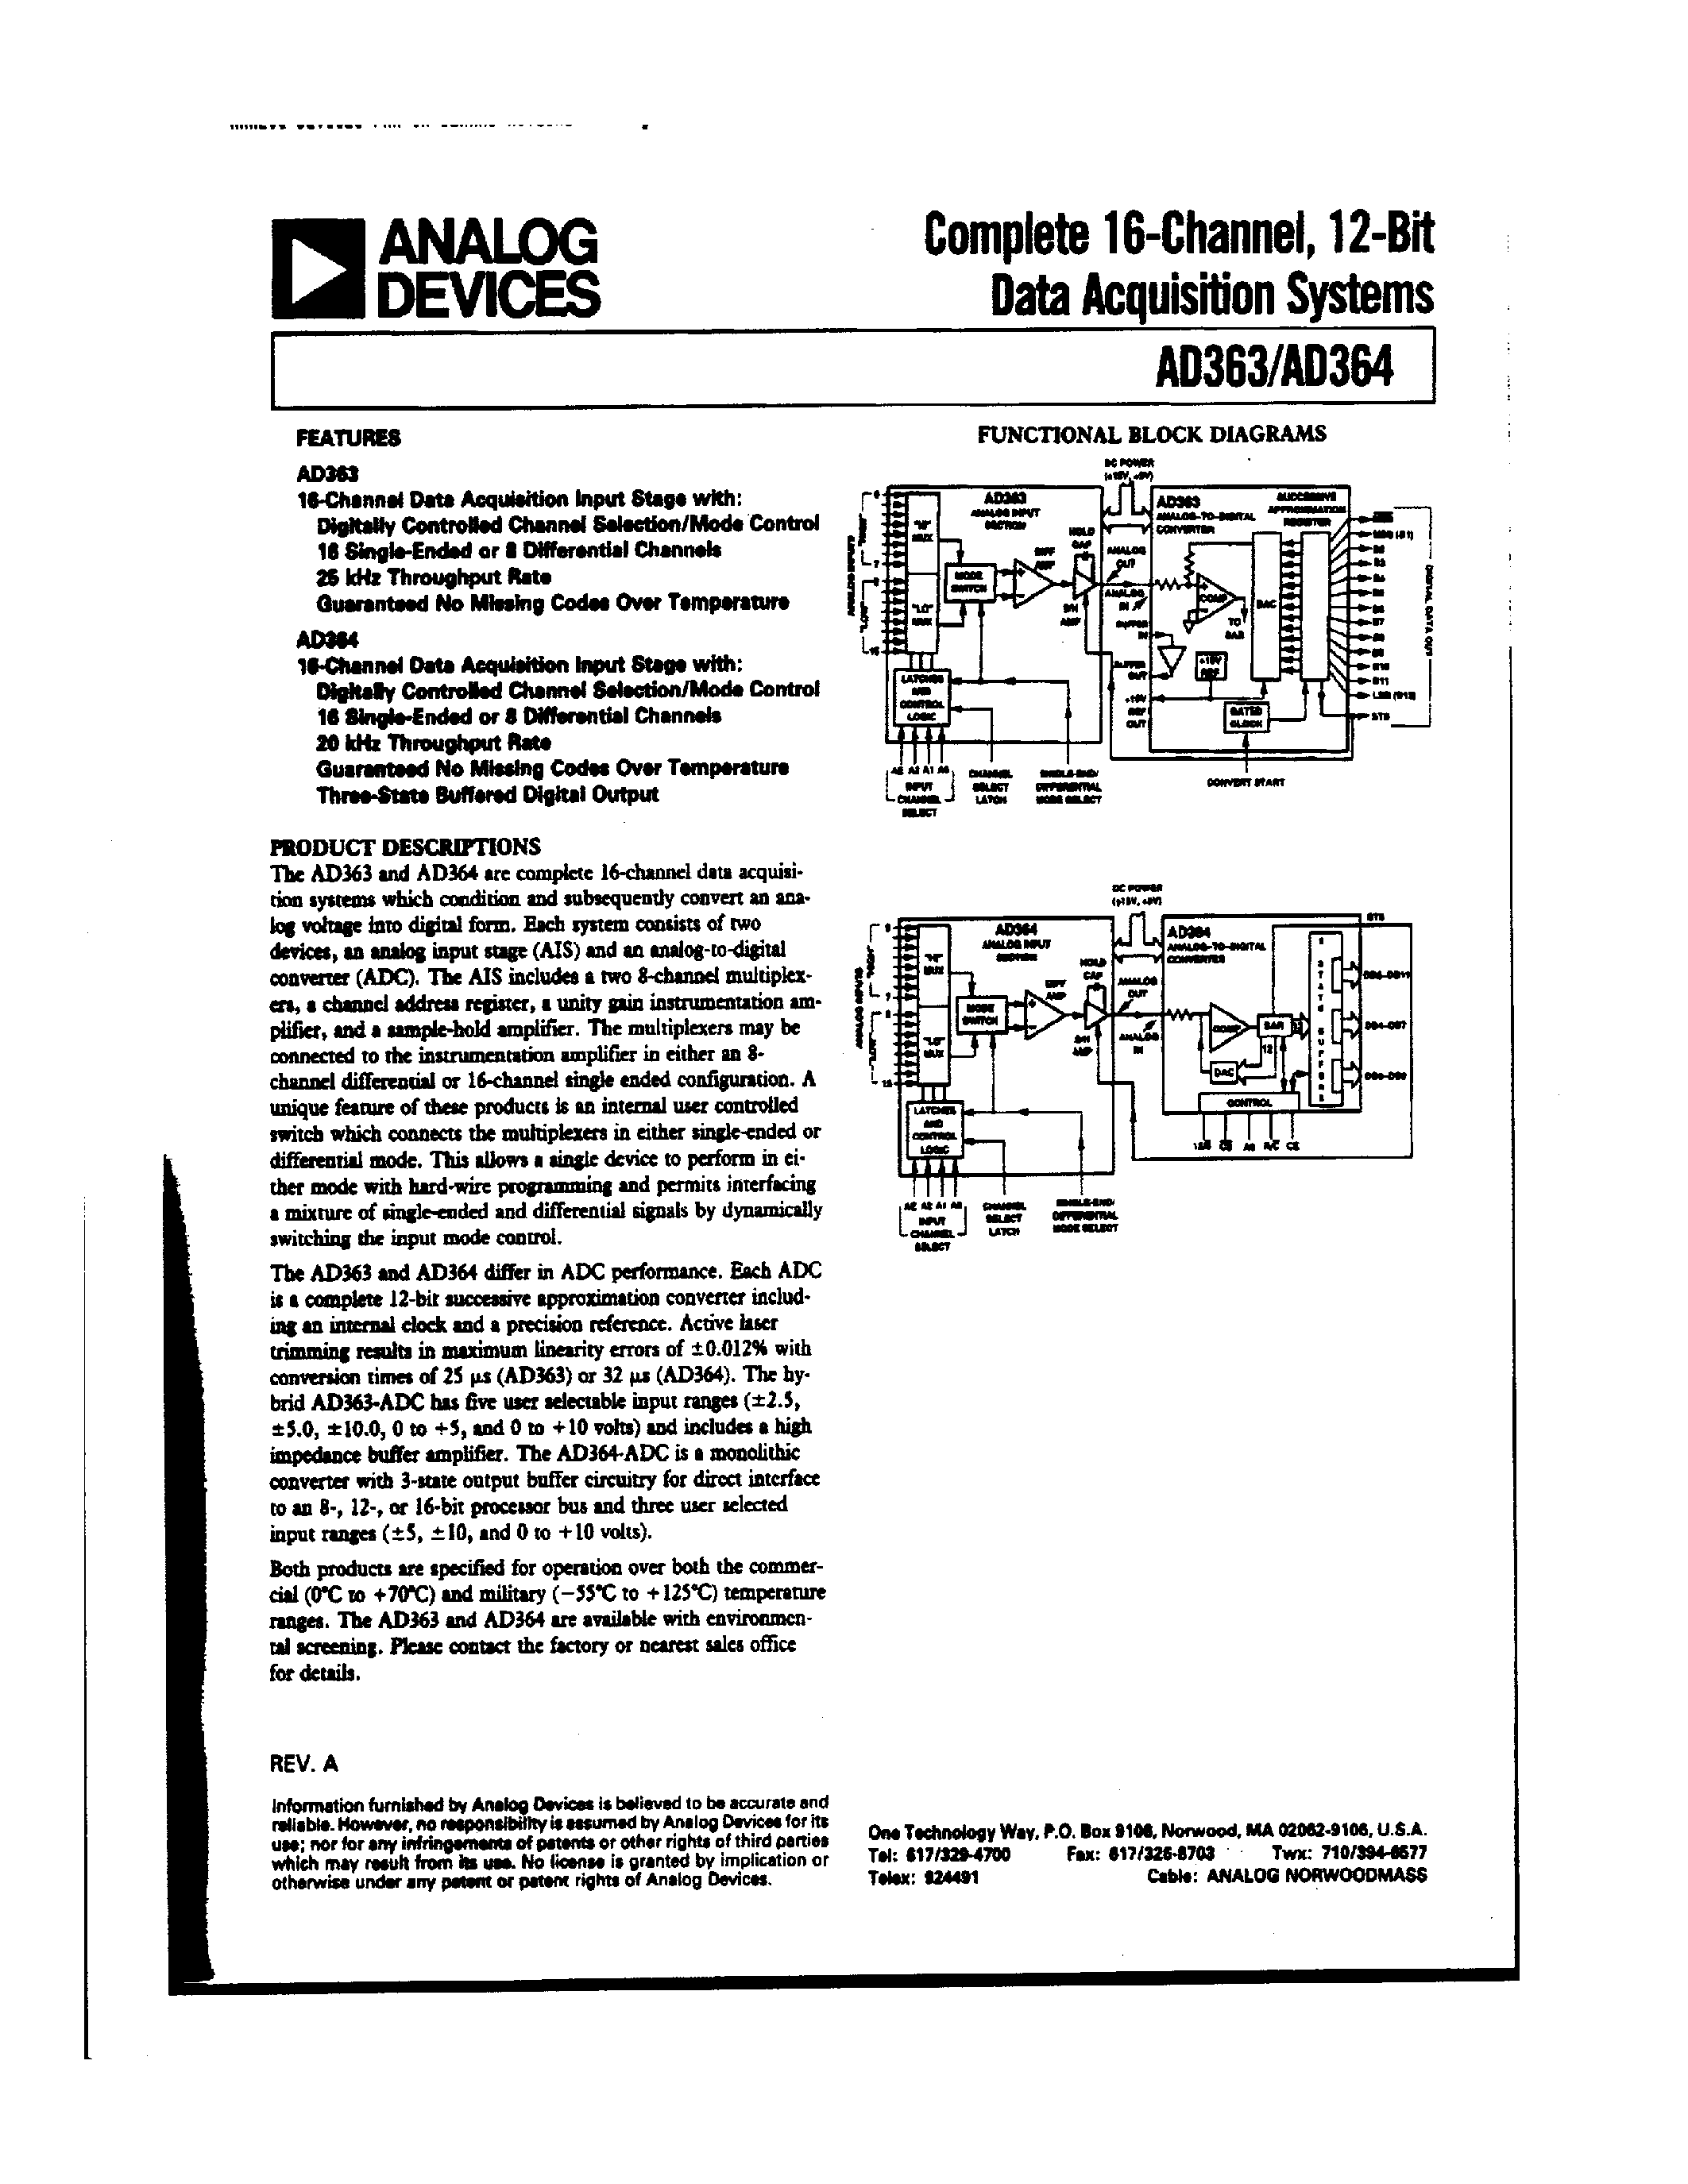 Datasheet AD363RSD - Complete 16-Channel/12-Bit Data Acquisition System page 1